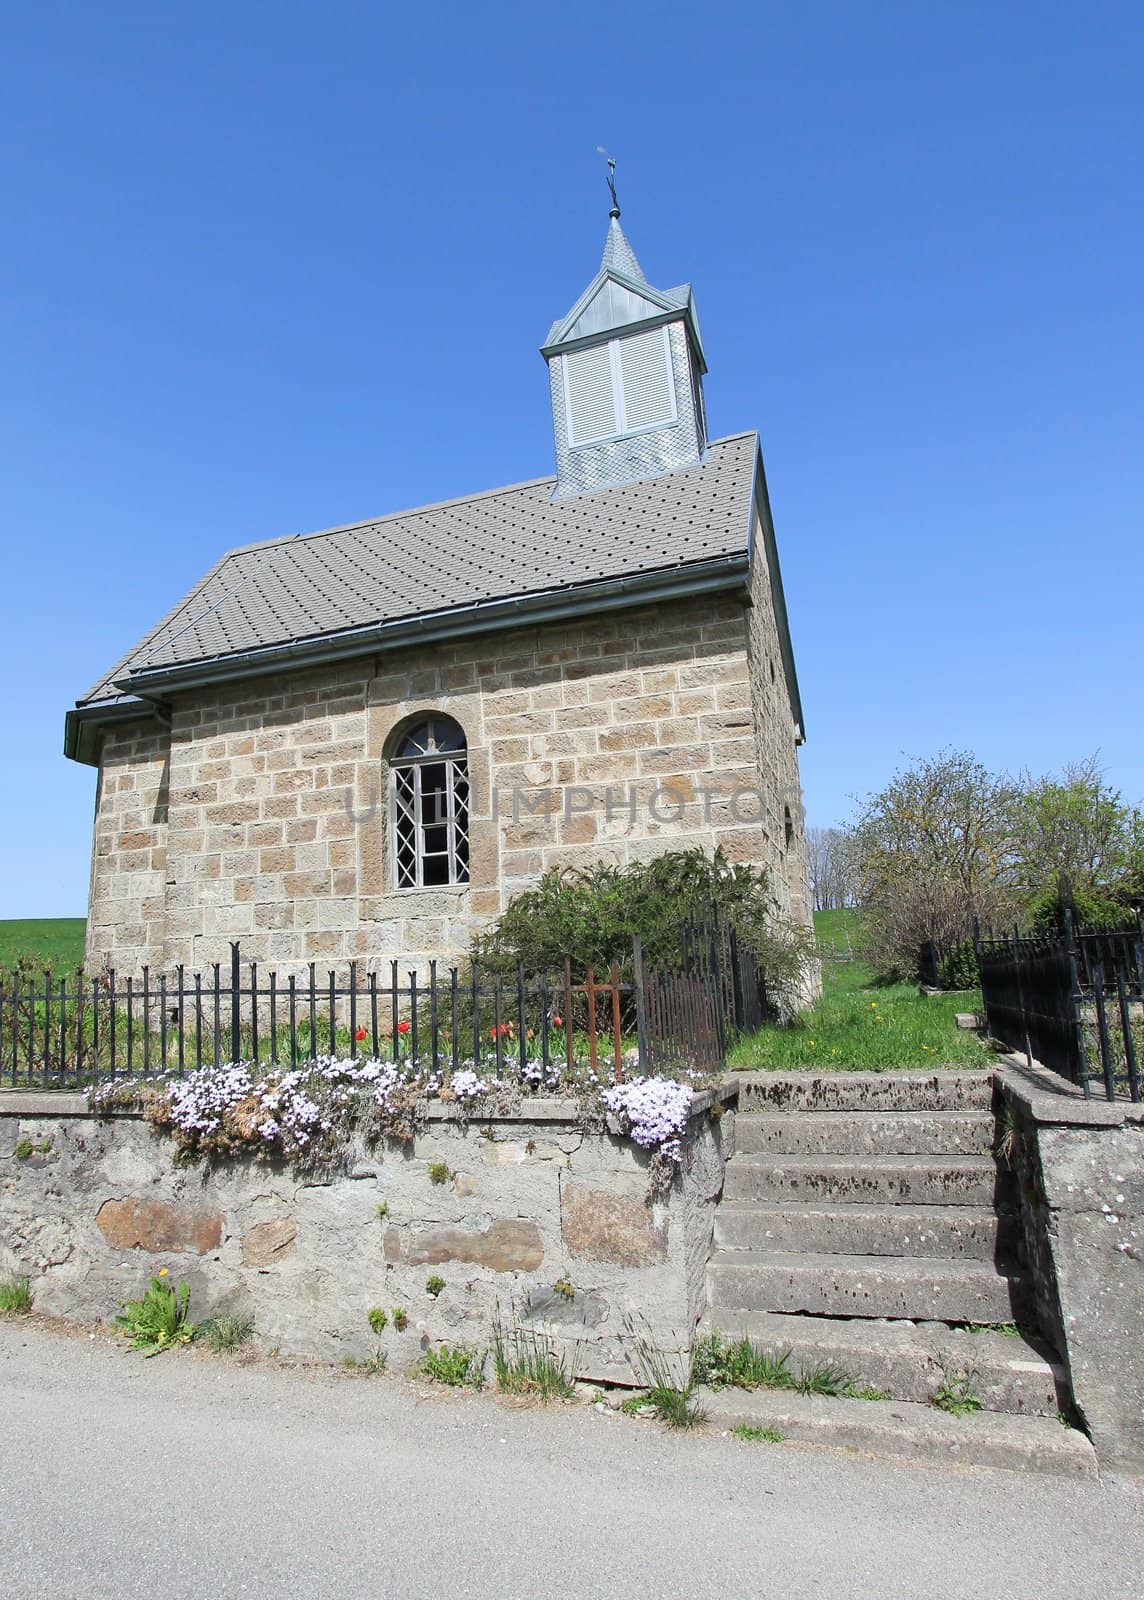 Chapel in Fiaugeres, small village in Fribourg canton, Switzerland, by beautiful weather